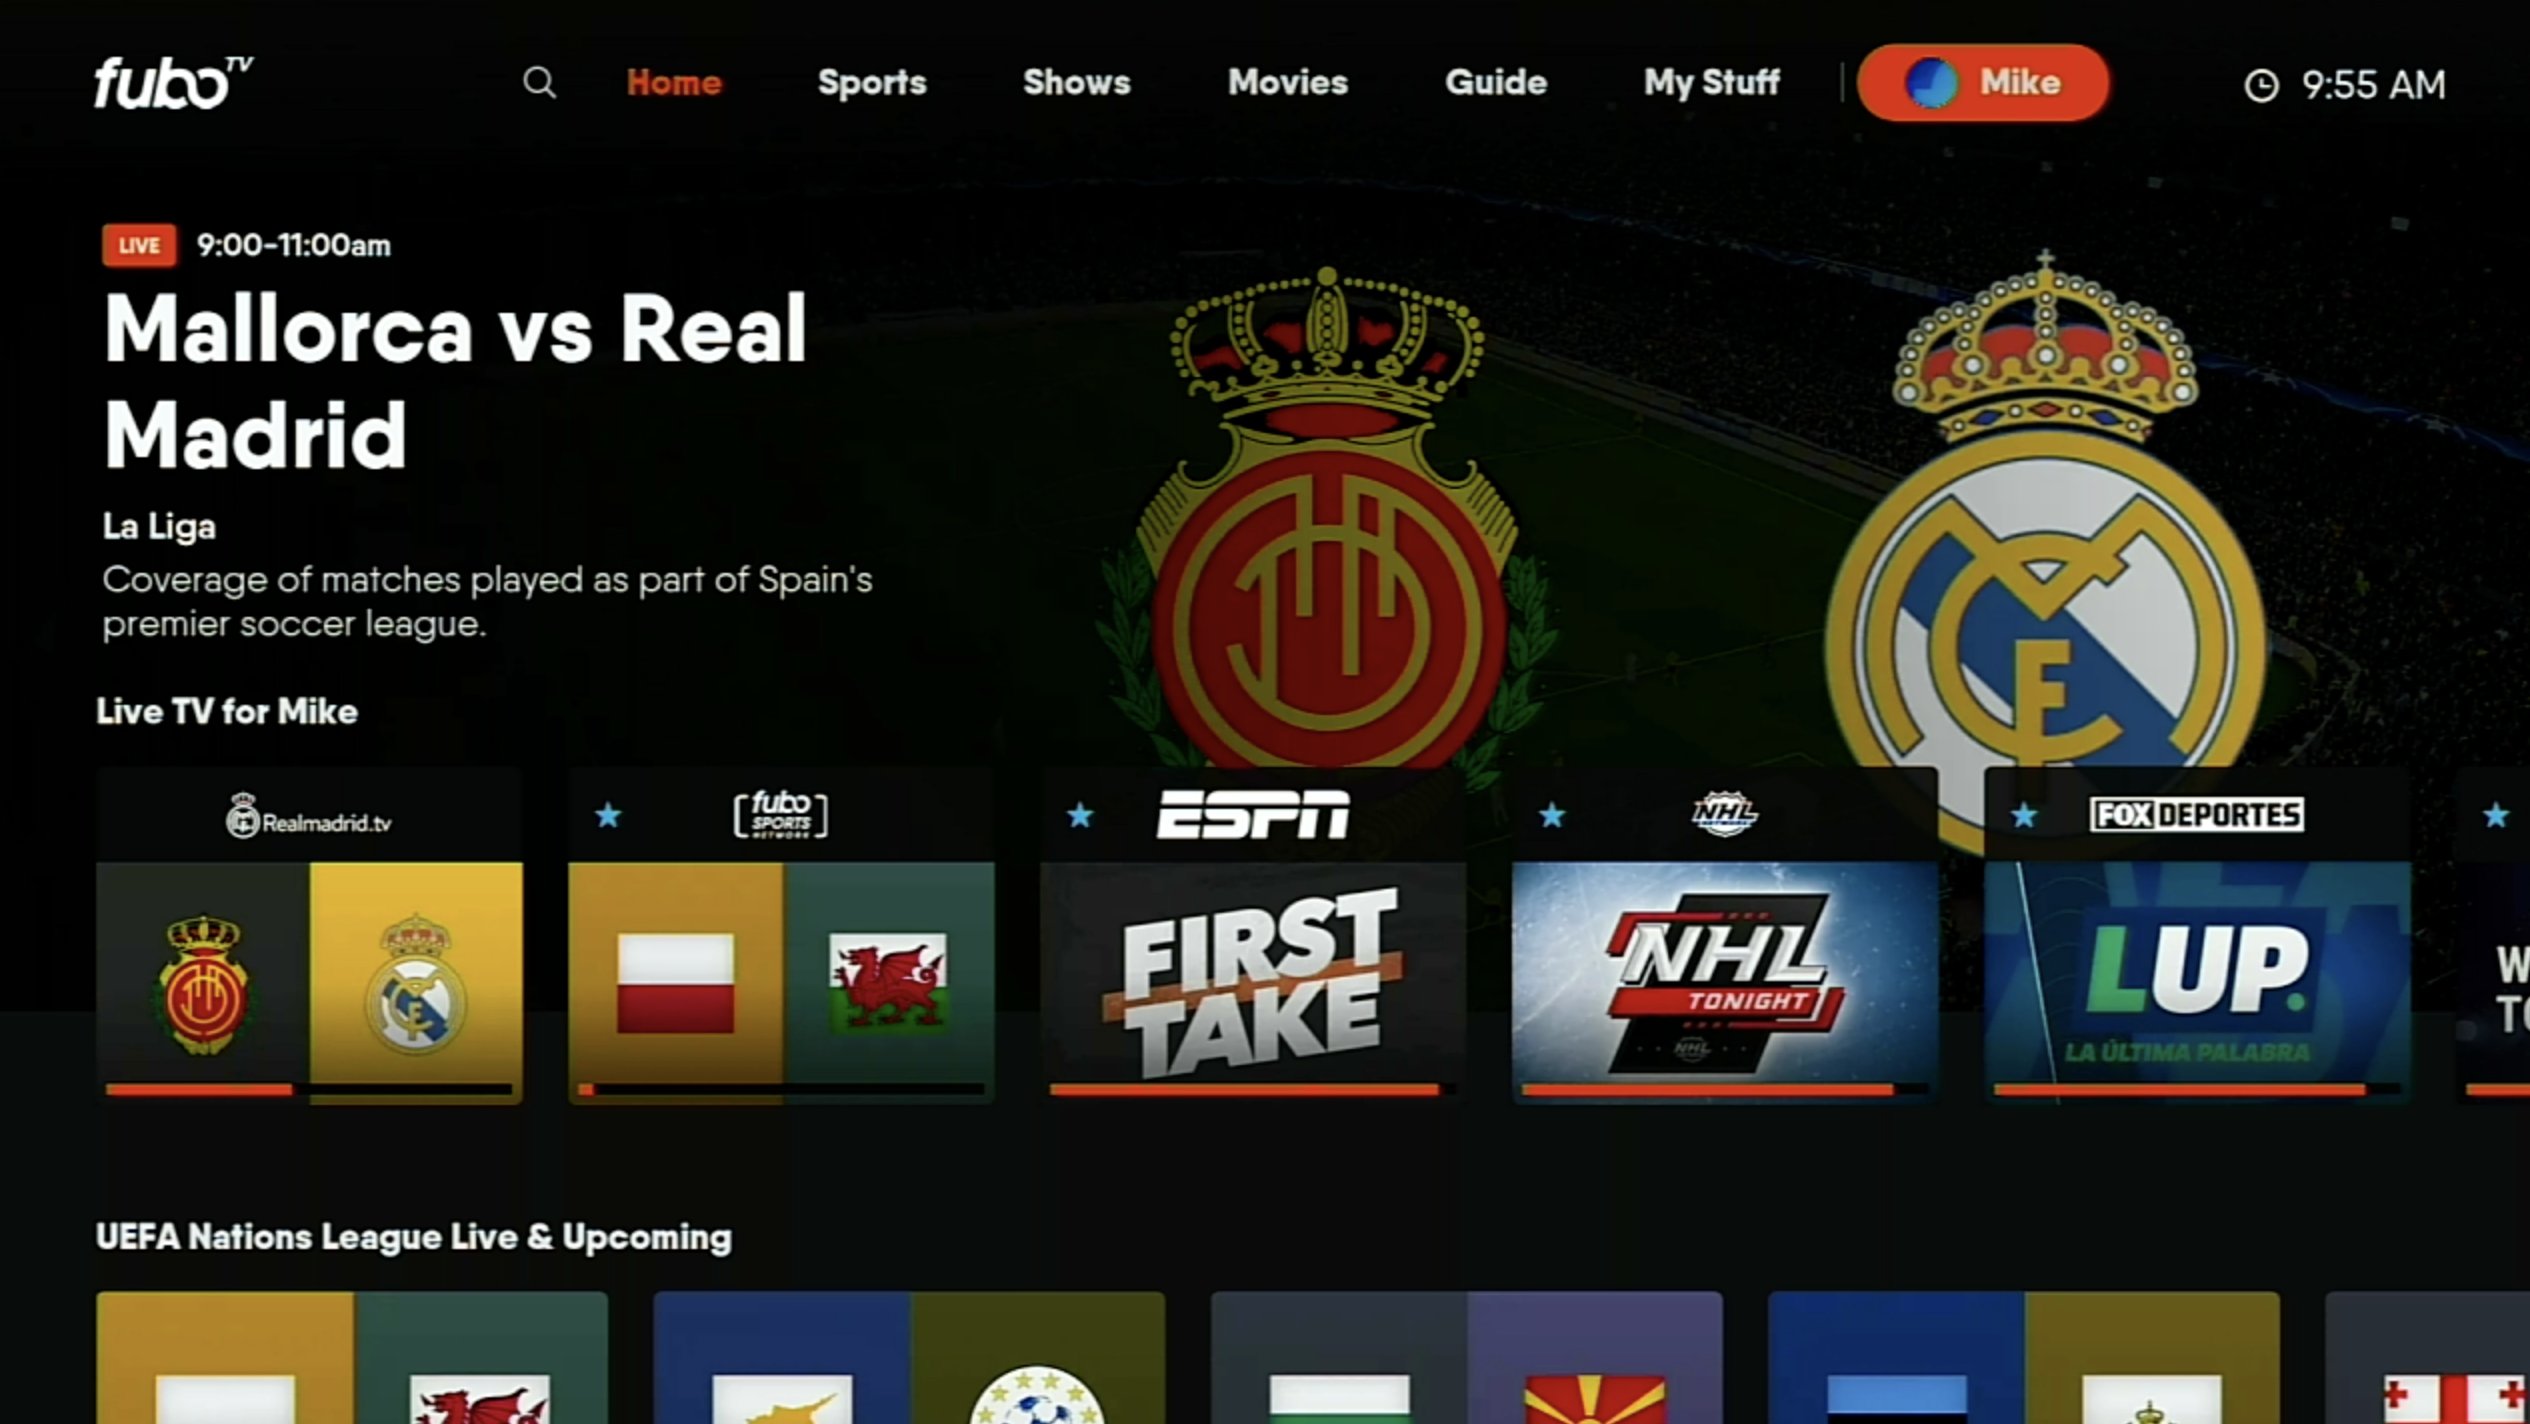 Home screen of the FuboTV app on a Roku with the account icon highlighted in the upper-right